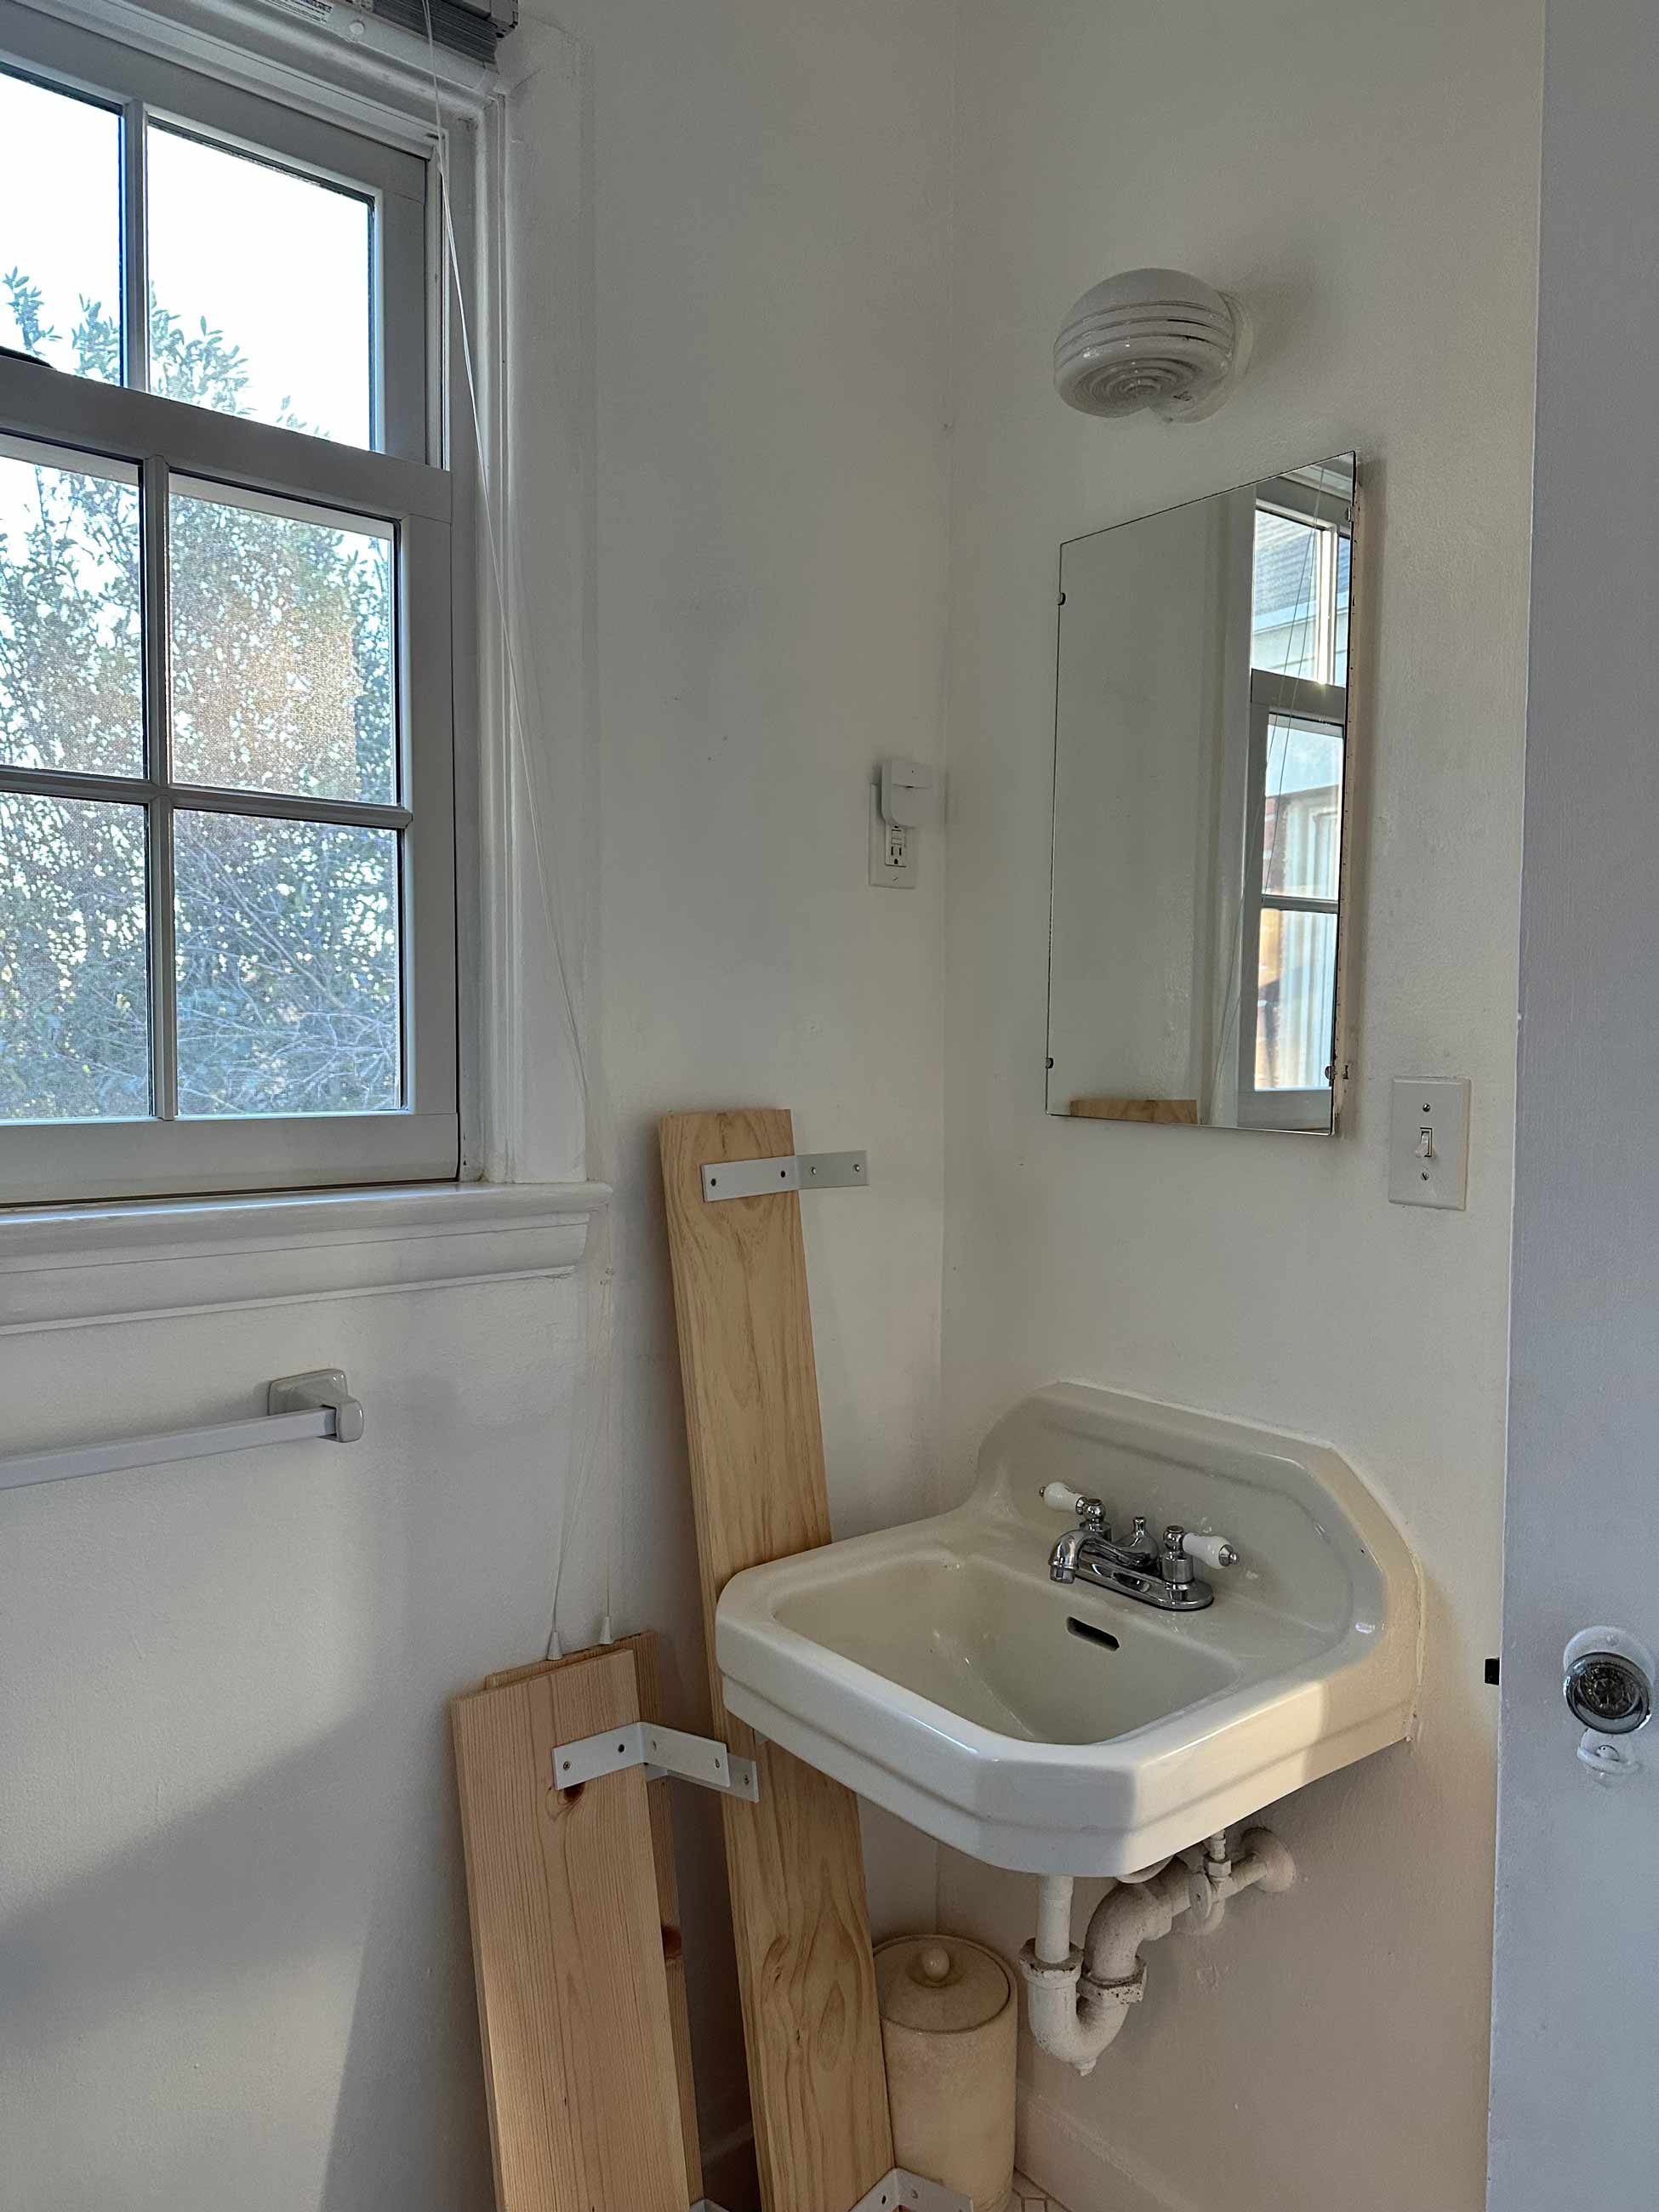 Before image of rental bathroom with white walls and outdated light fixture above sink.